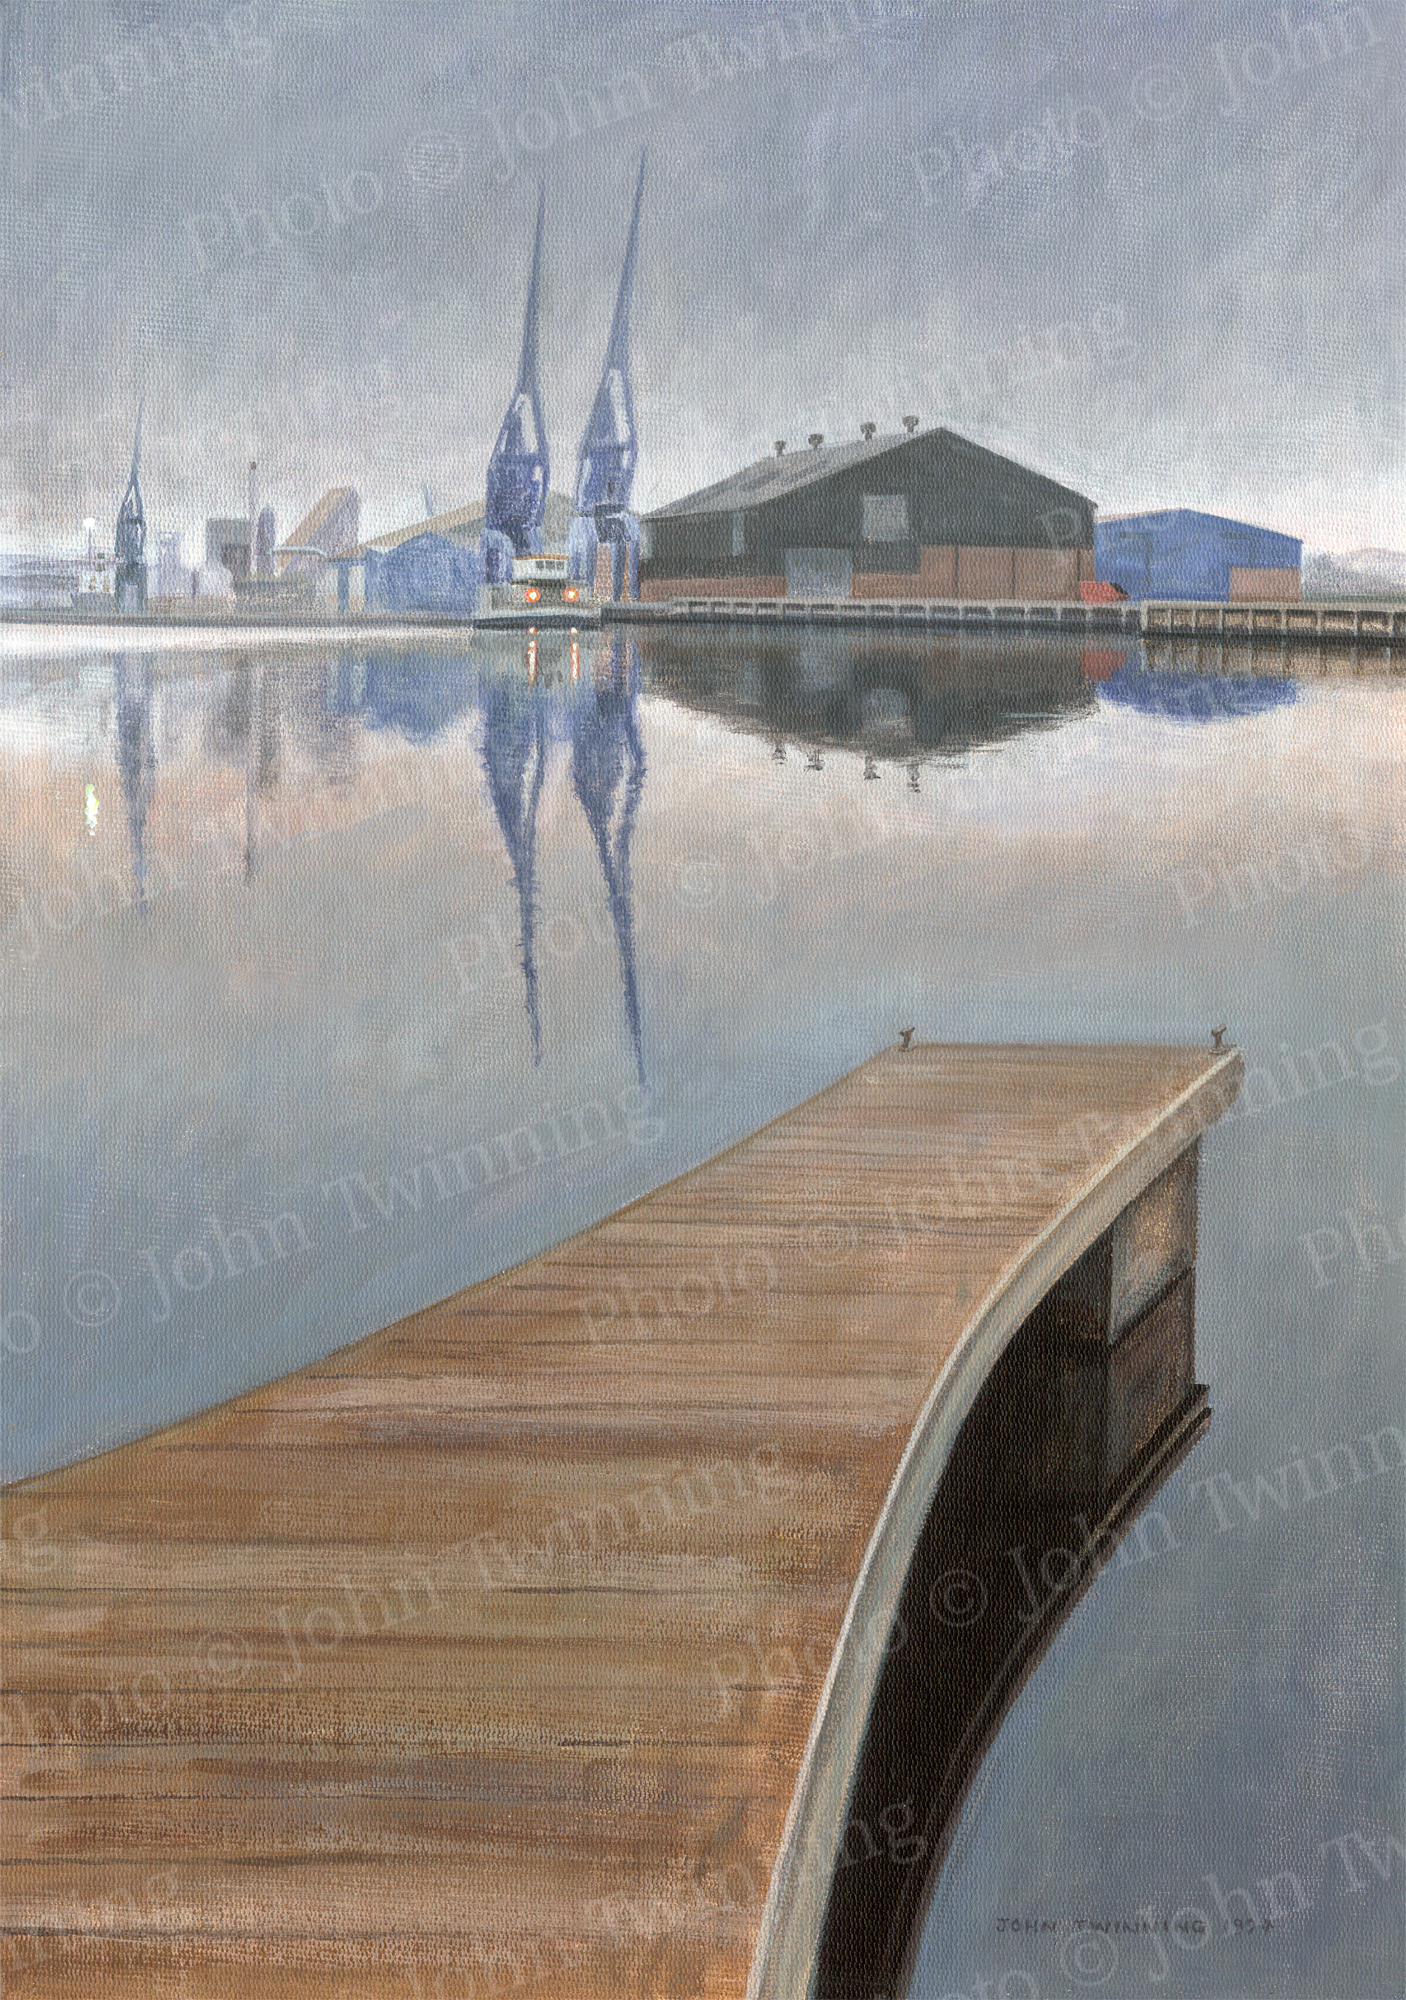 'Misty Morning On The Jetty, Ipswich Docks, Suffolk' - art print from a marine/maritime painting